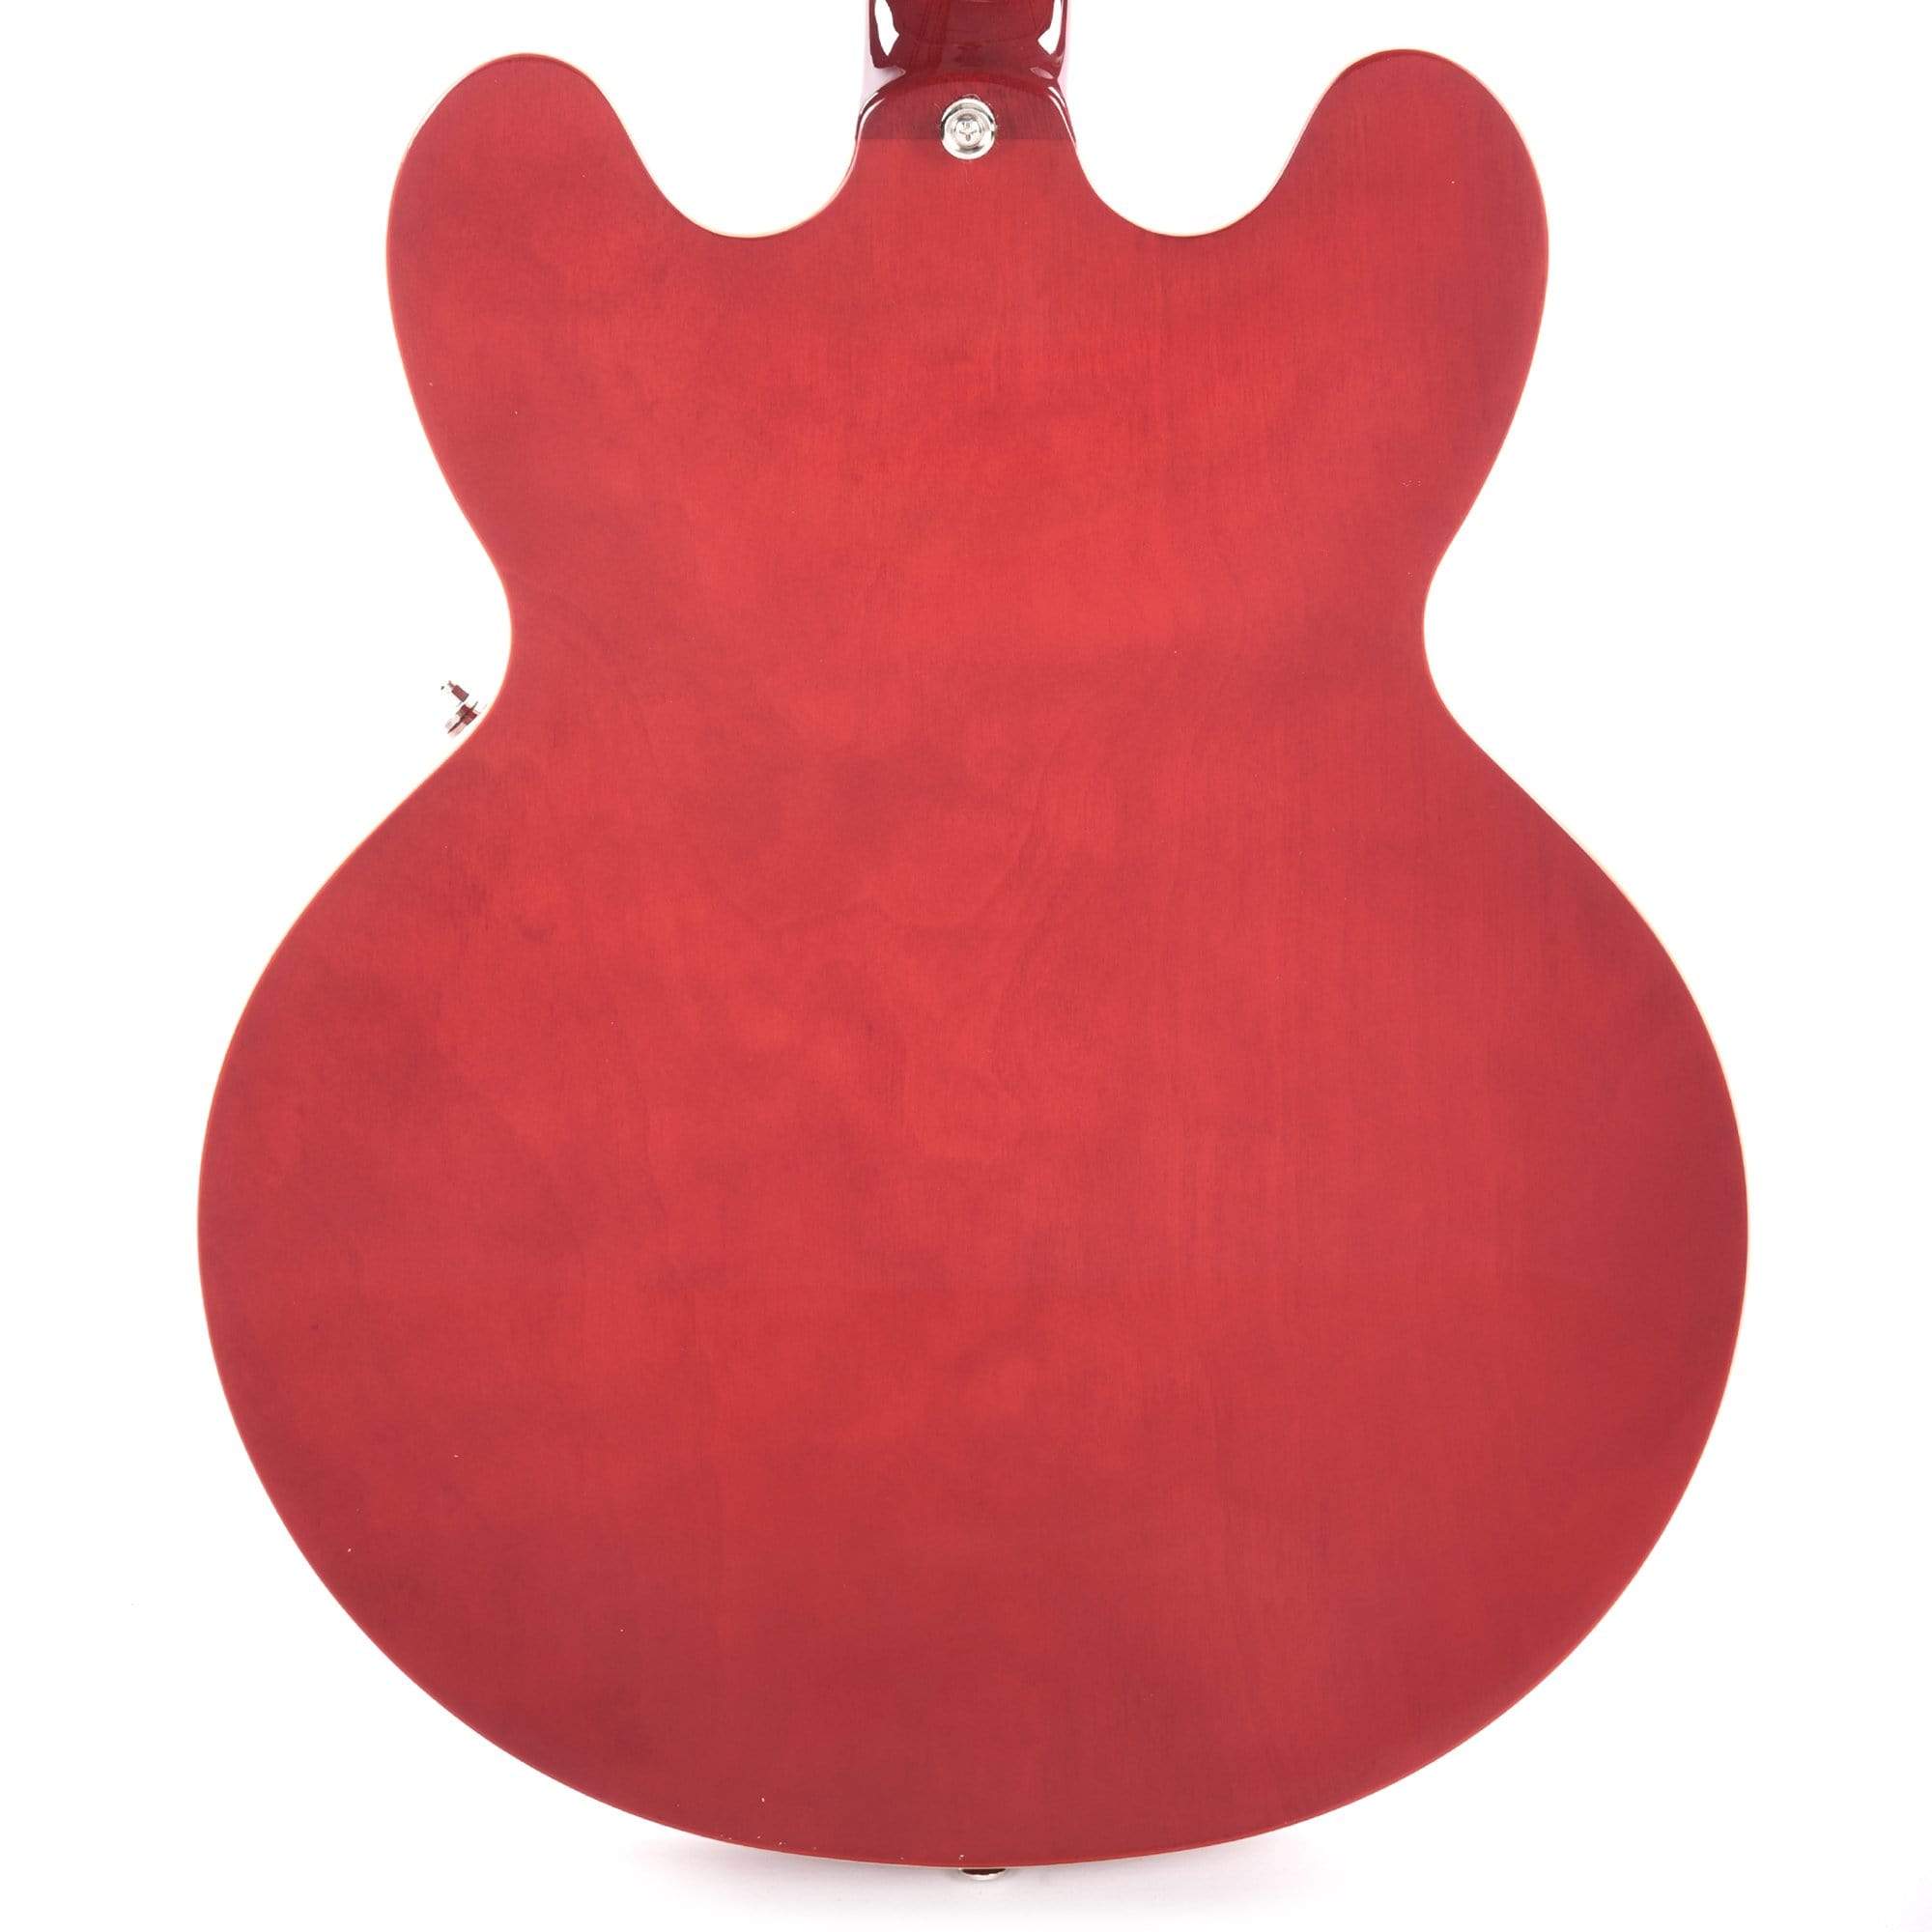 Epiphone Inspired by Gibson ES-335 Cherry Electric Guitars / Semi-Hollow